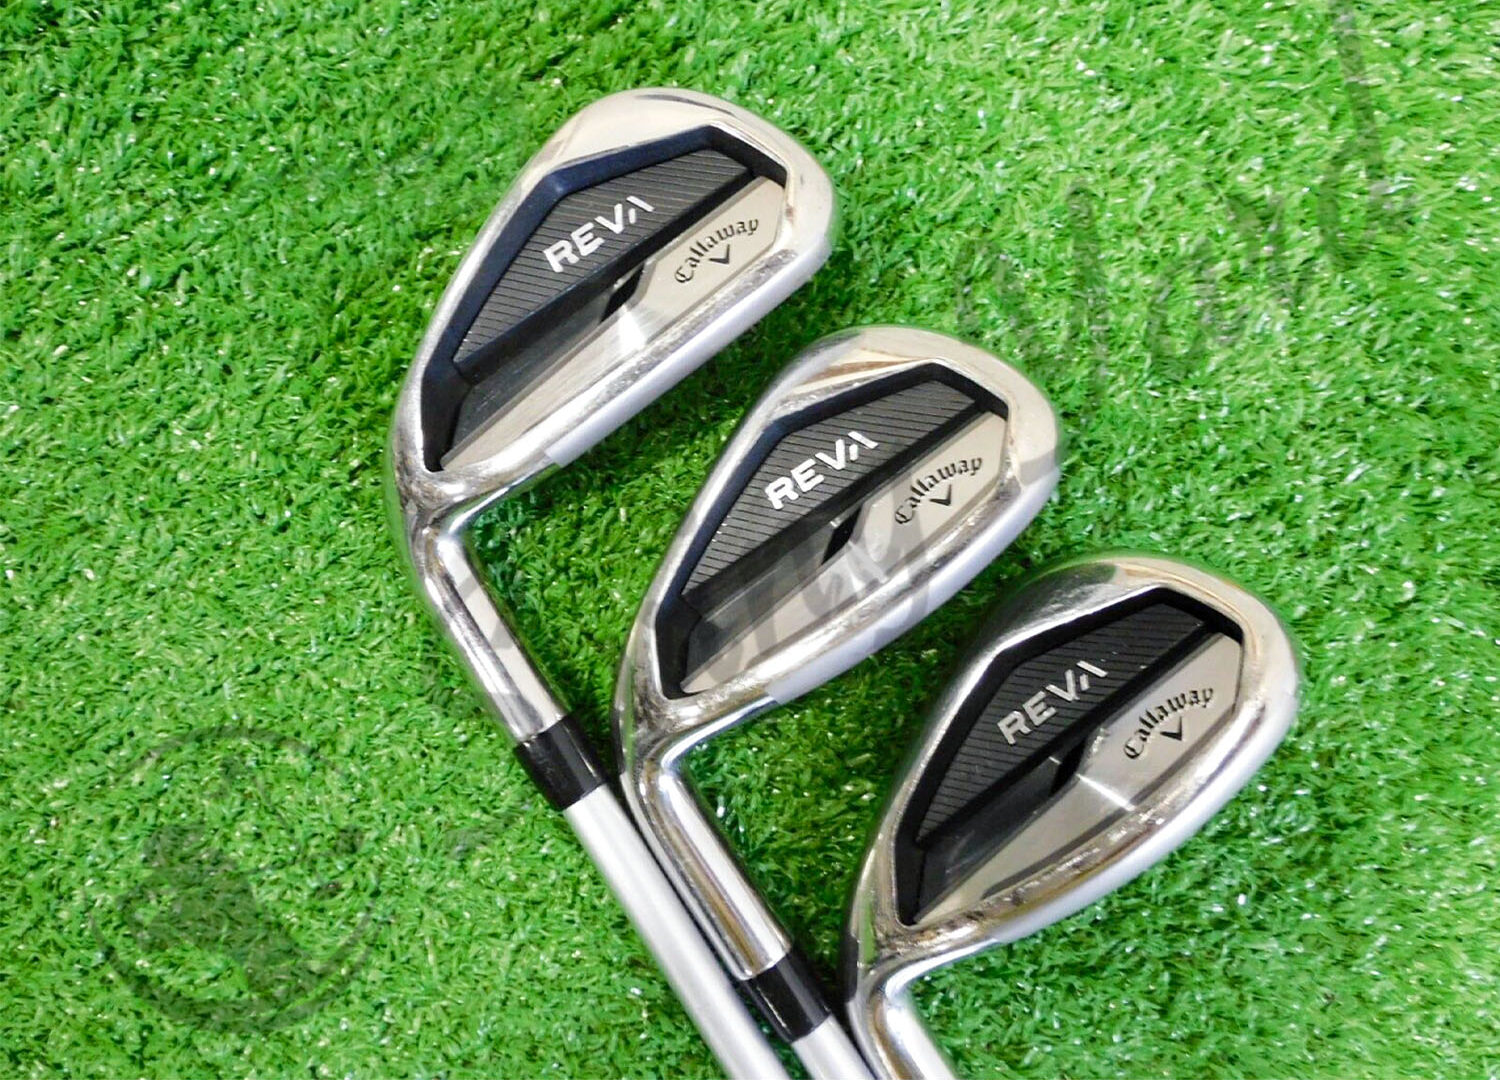 The Callaway Reva Irons testing at the golf course